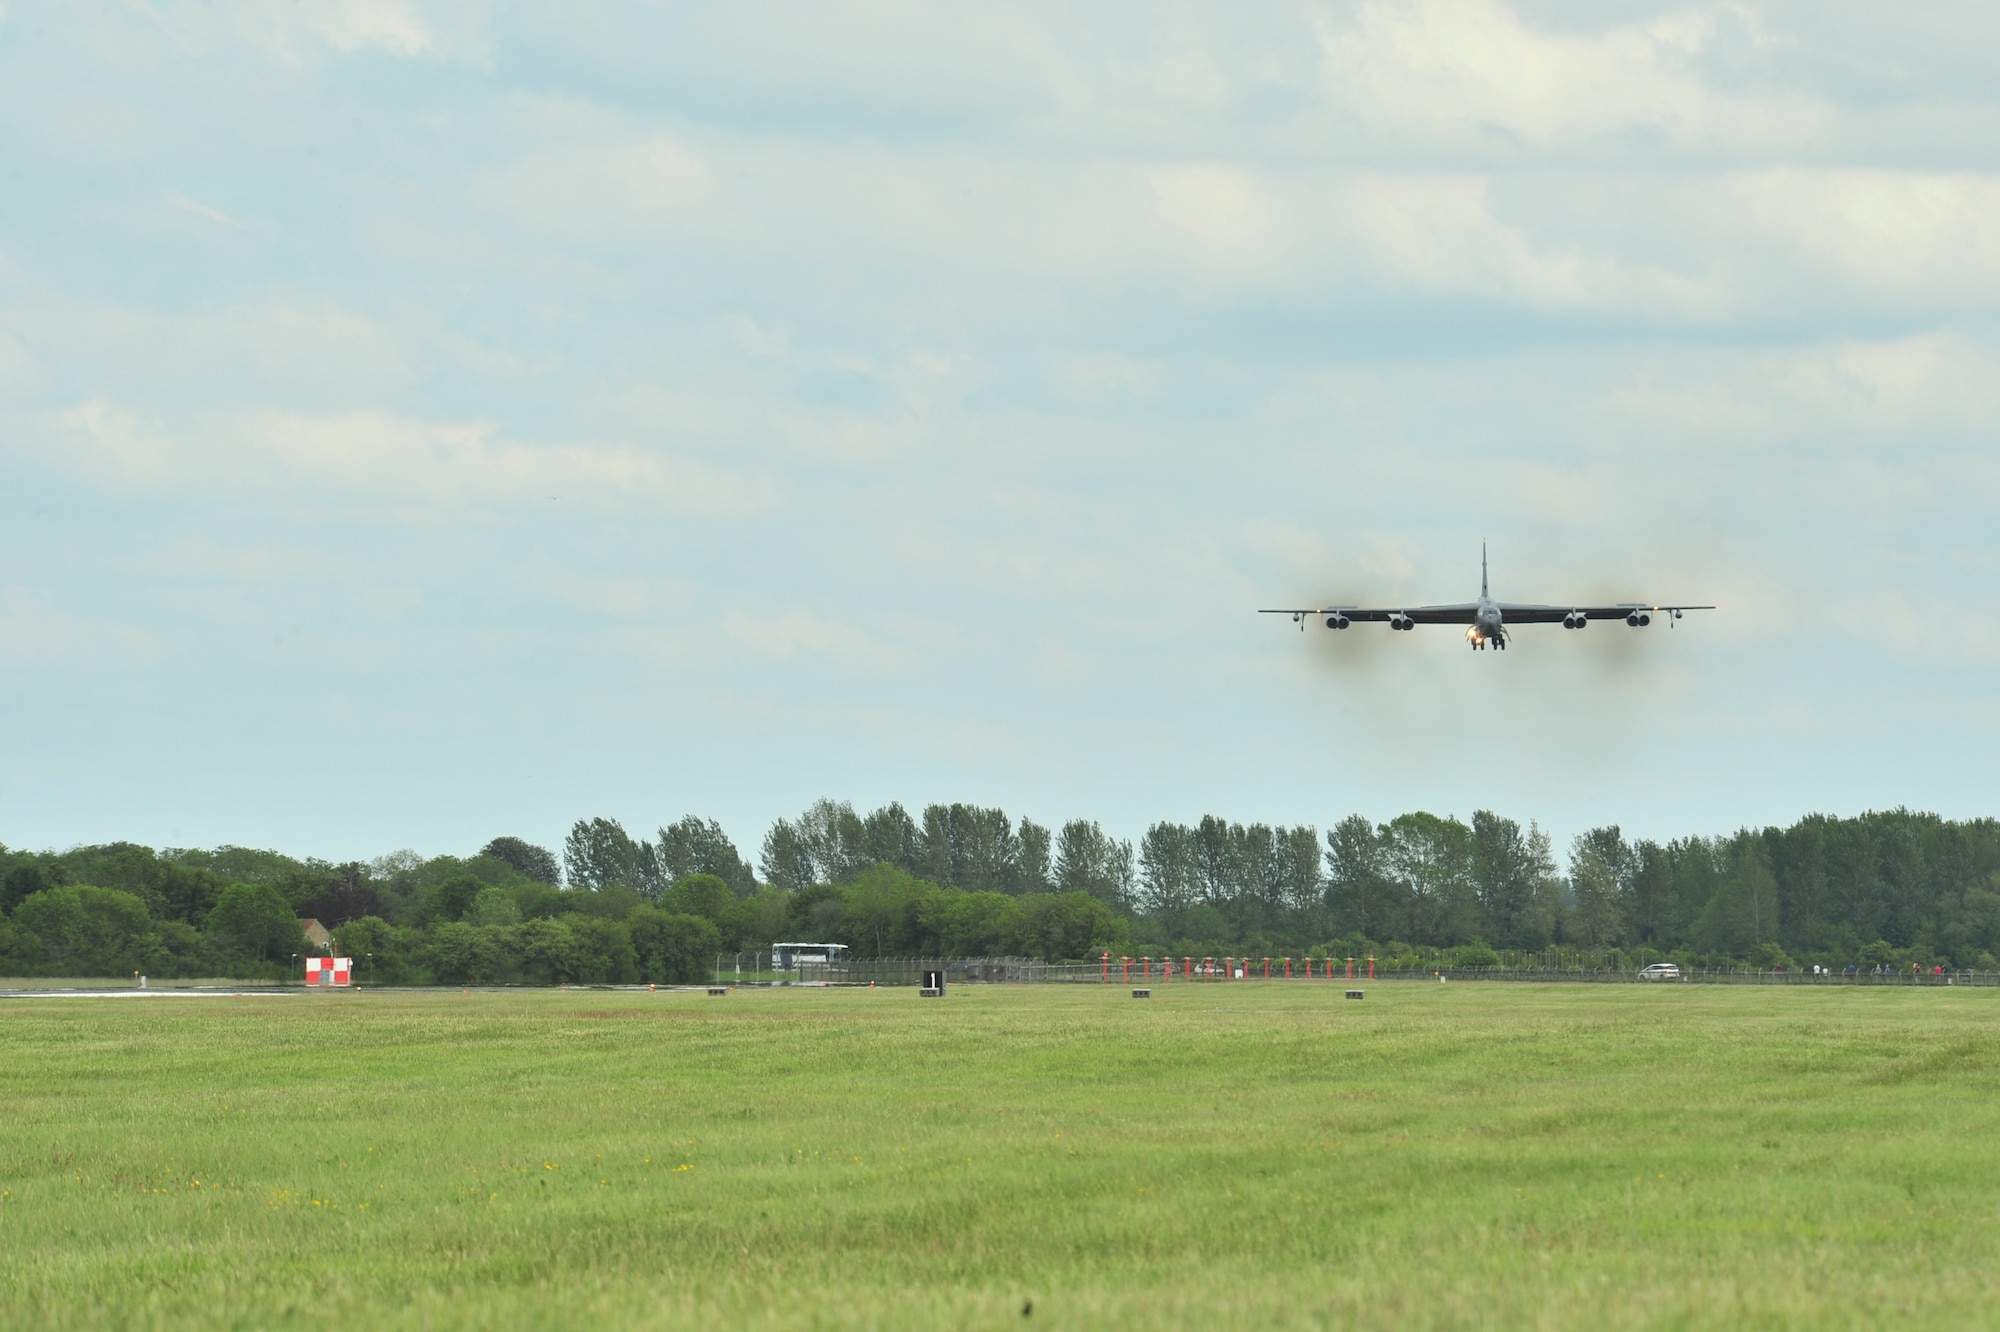 A B-52 Stratofortress assigned to the 5th Bomb Wing at Minot Air Force Base, N.D., arrives at Royal Air Force Fairford, England, June 5, 2015. During the short-term deployment, three Minot-based B-52 bombers, supported by more than 330 Air Force Global Strike Command Airmen, conducted training flights with ground and naval forces around the region and participated in multinational exercises Baltops 2015 and Saber Strike 2015 over international waters in the Baltic Sea and the territory of the Baltic states and Poland. (U.S. Air Force photo/Senior Airman Malia Jenkins) 